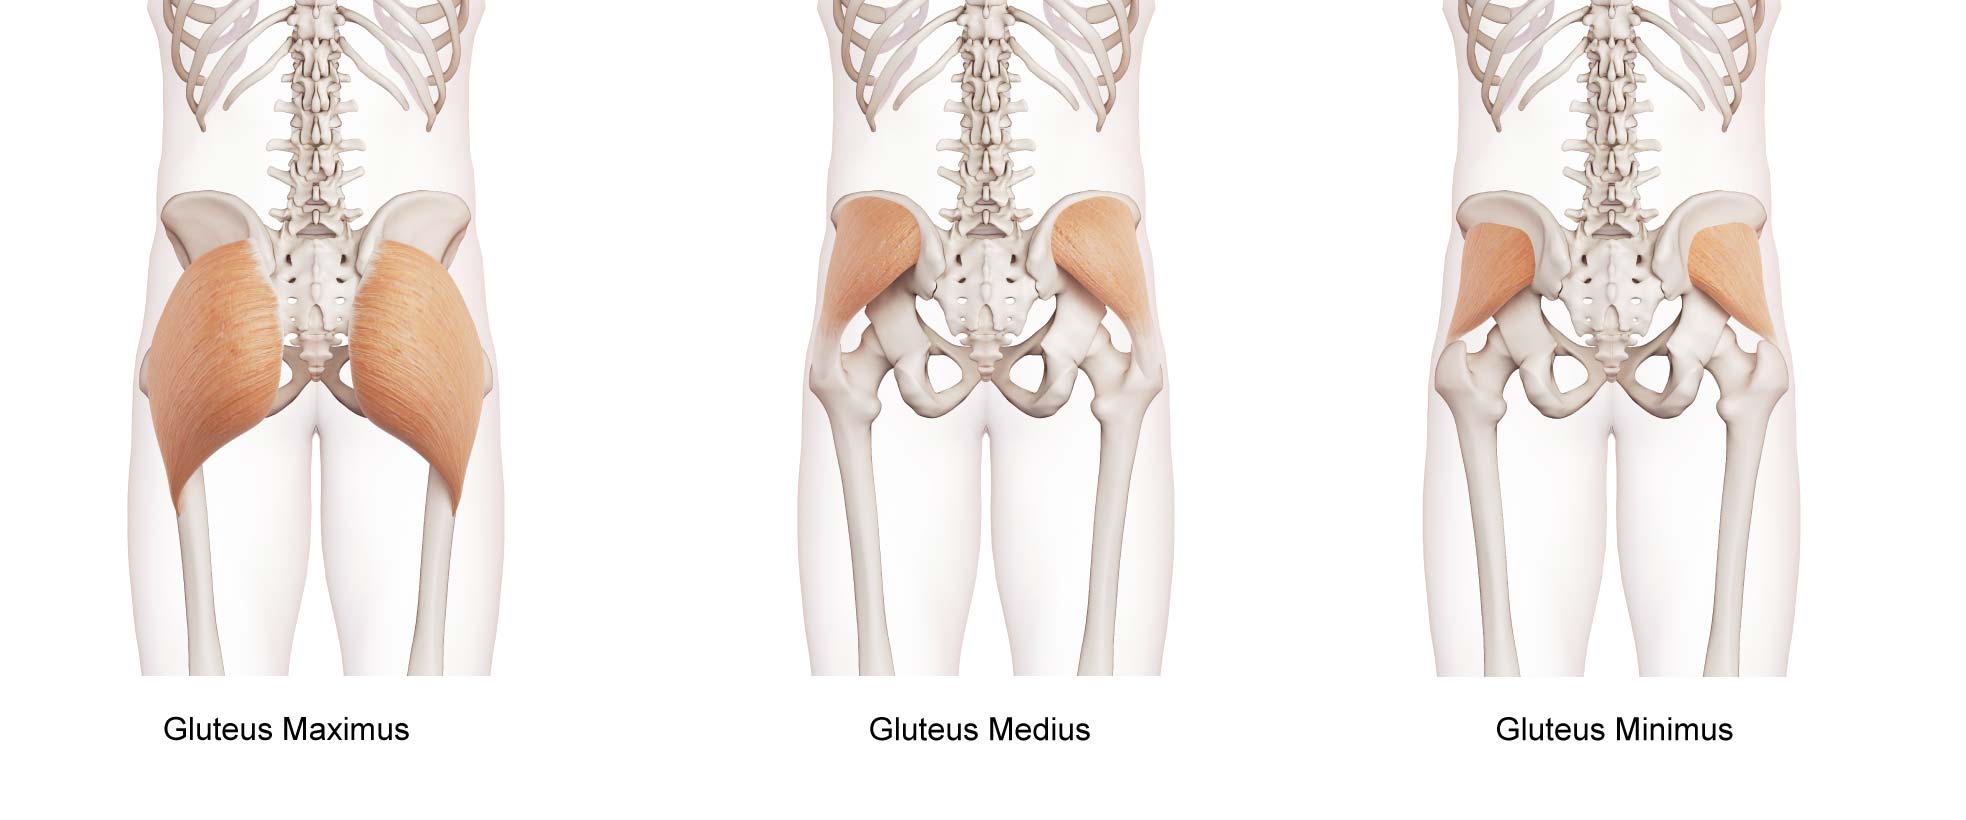 A view from the back of the gluteal muscles